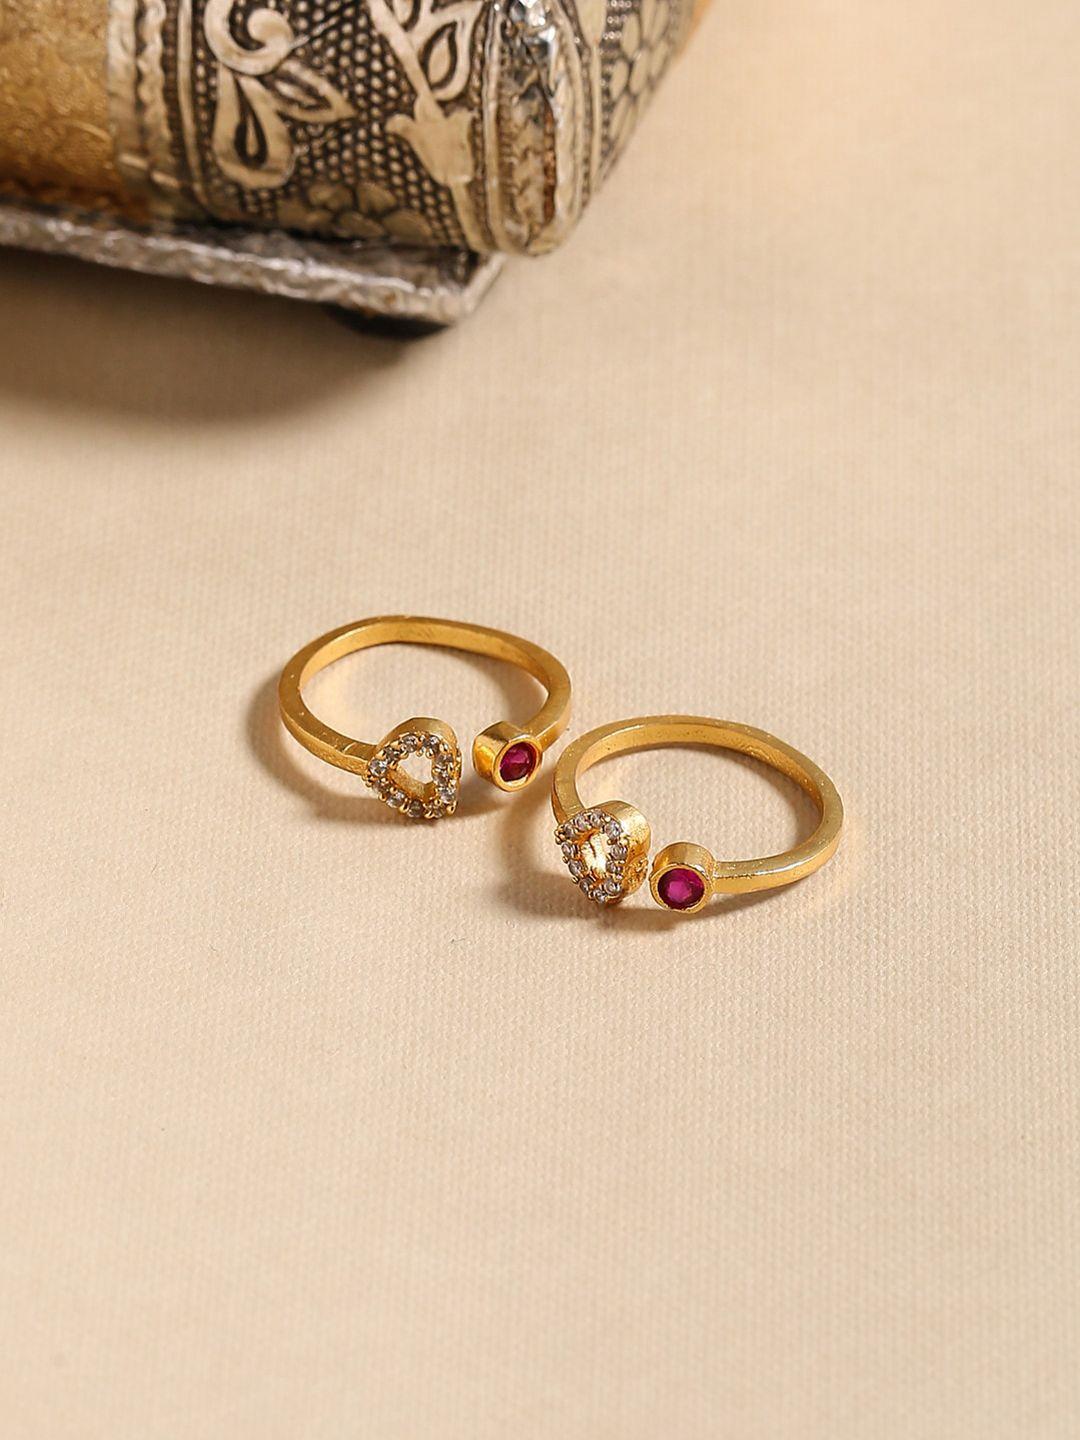 shoshaa set of 2 gold-plated pink & white stone-studded handcrafted toe rings